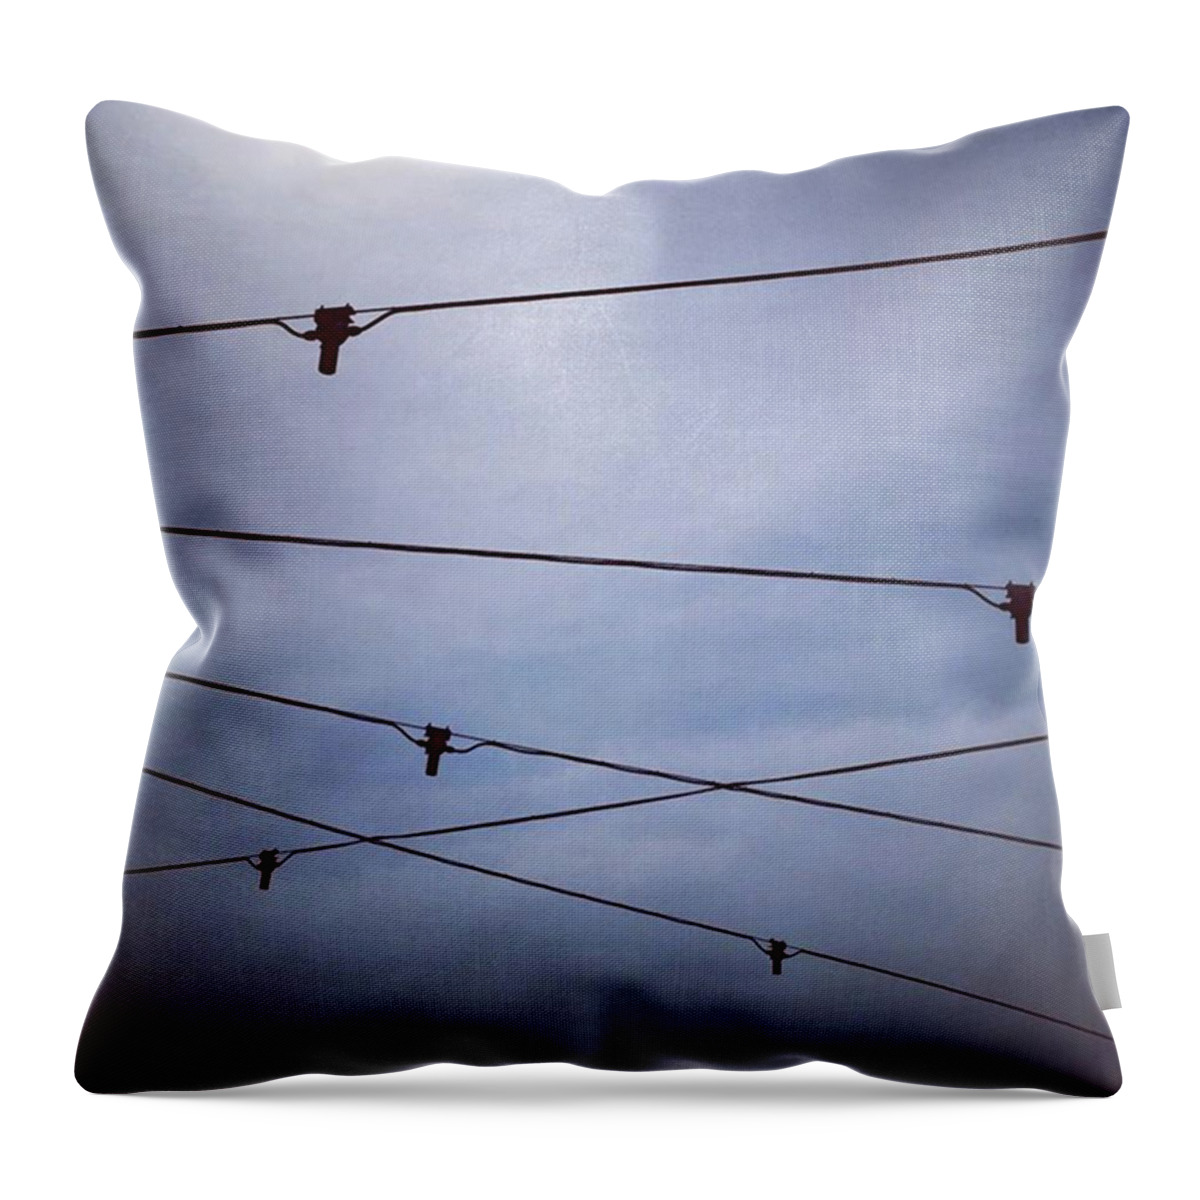 Simplicity Throw Pillow featuring the photograph Cross-cross. #lookup #lookingup #wires by Ginger Oppenheimer